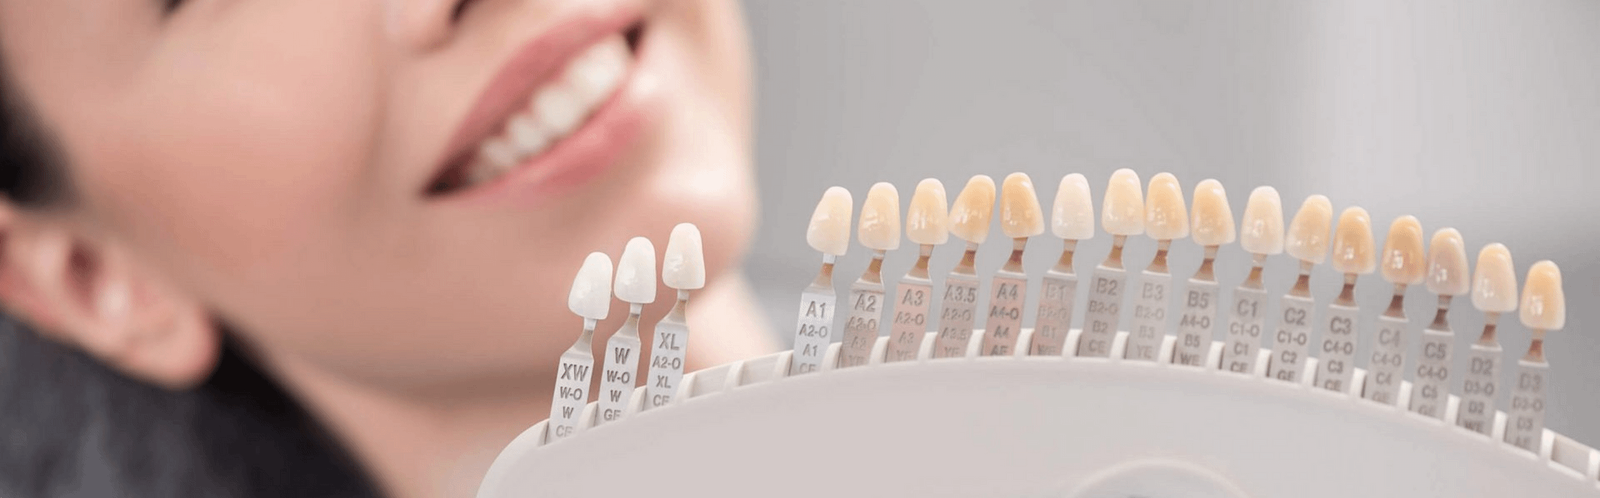 What Are The Different Types Of Dental Crowns? - Gentle Dental Centre Wellington